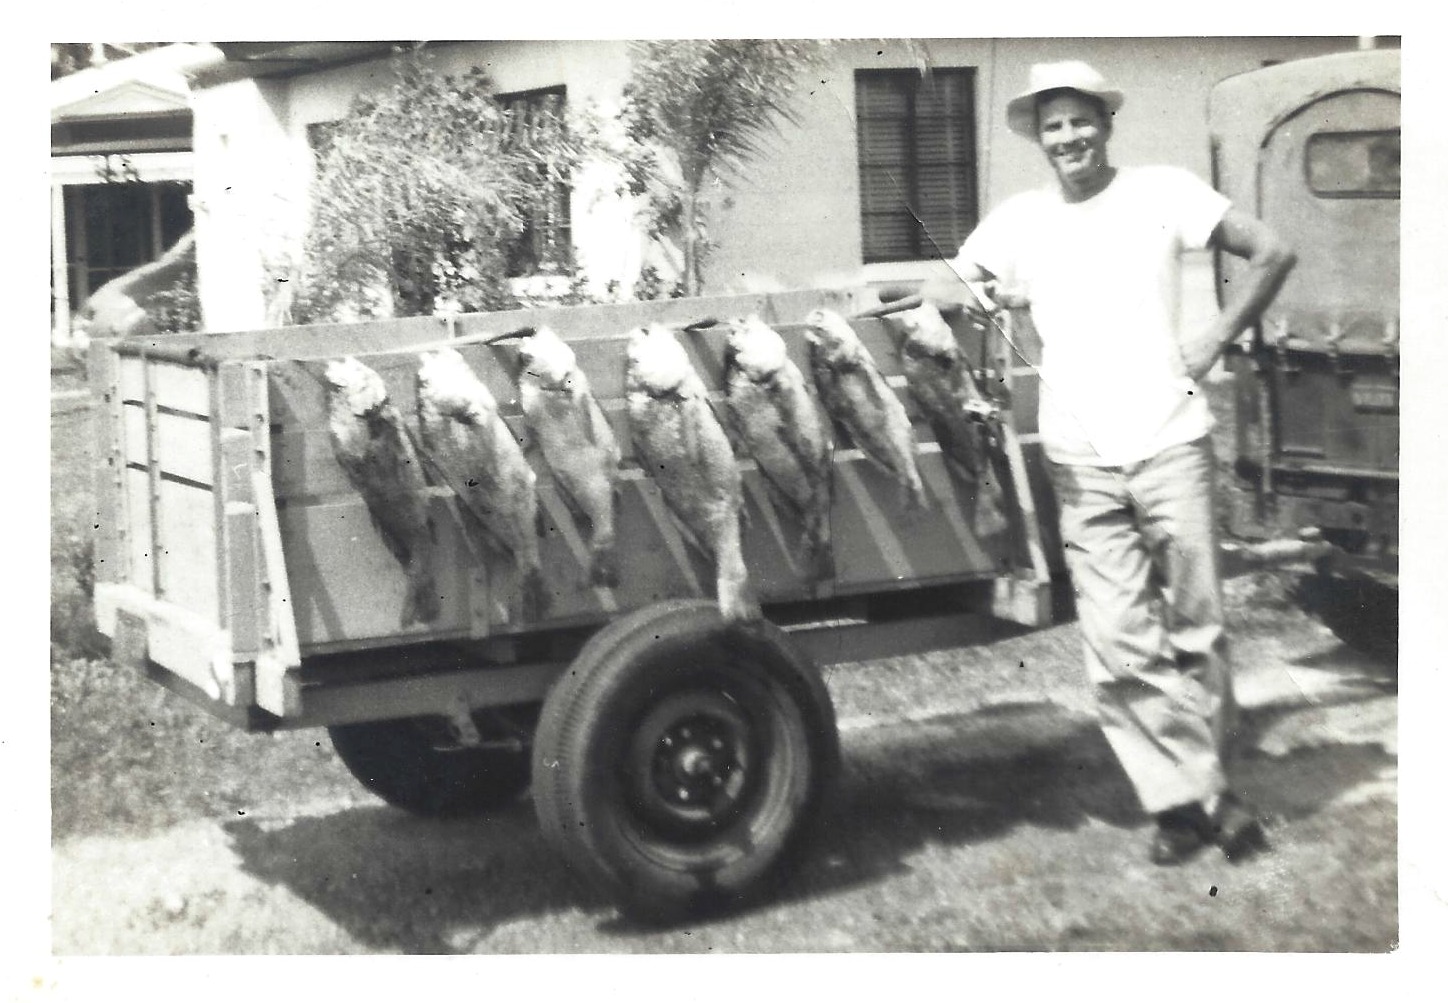 my grandfather bass fishing in florida in the 1950's